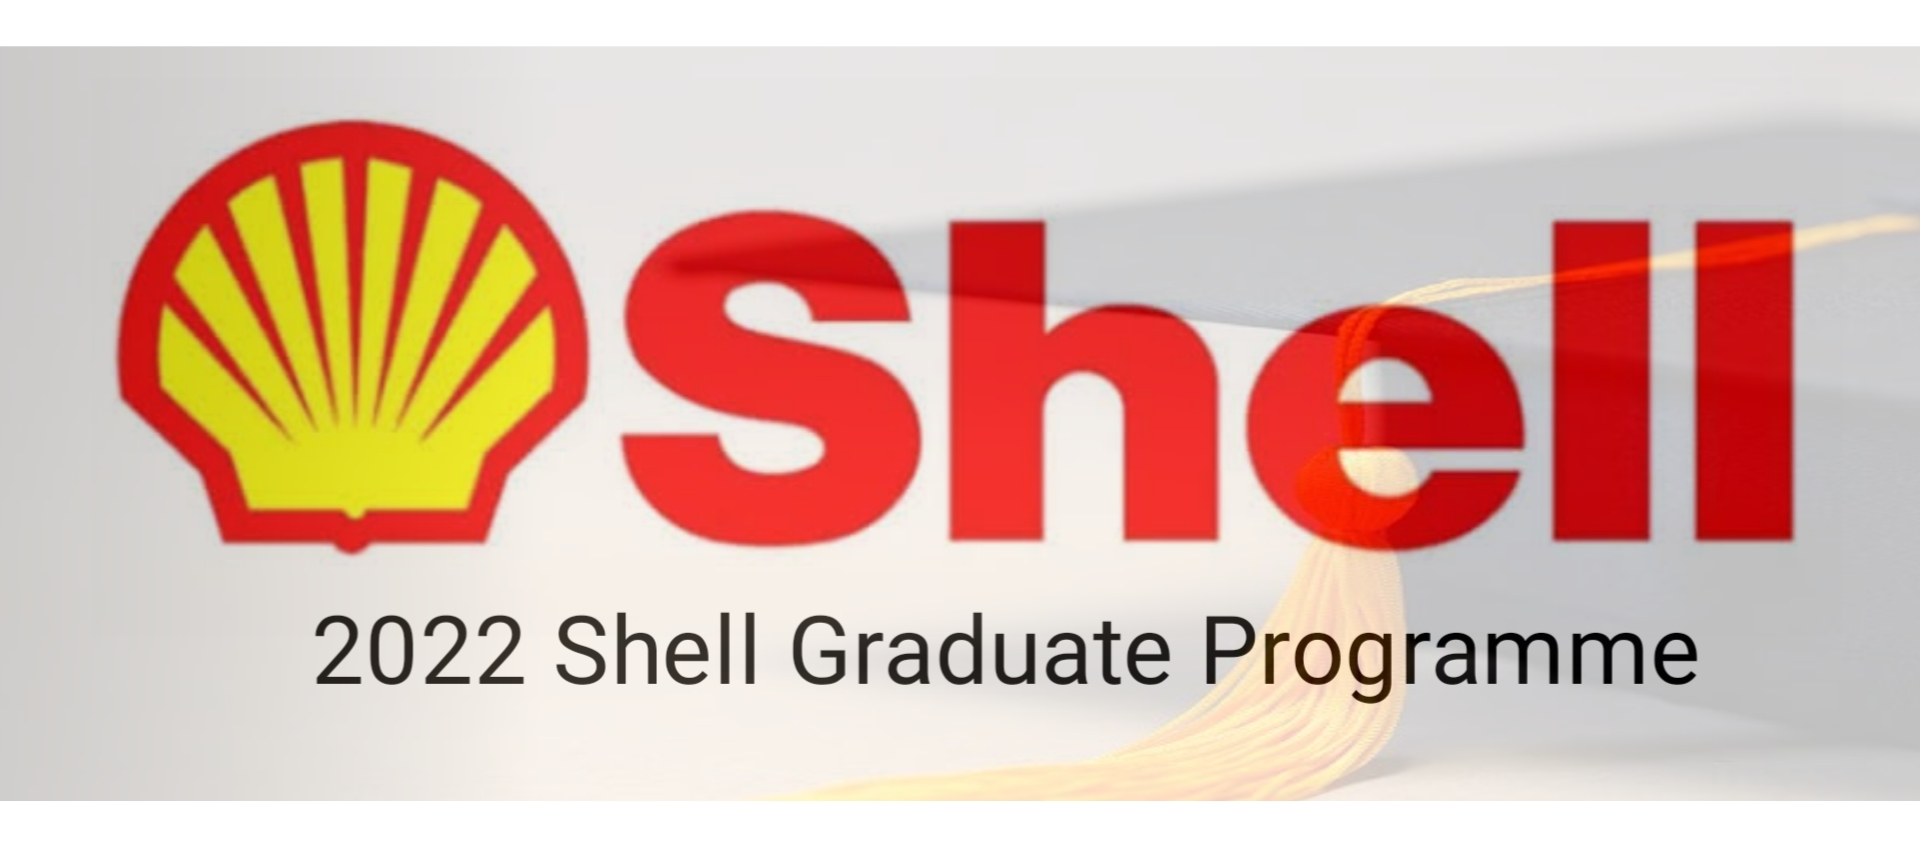 Link To Apply for 2022 Shell Graduate Programme